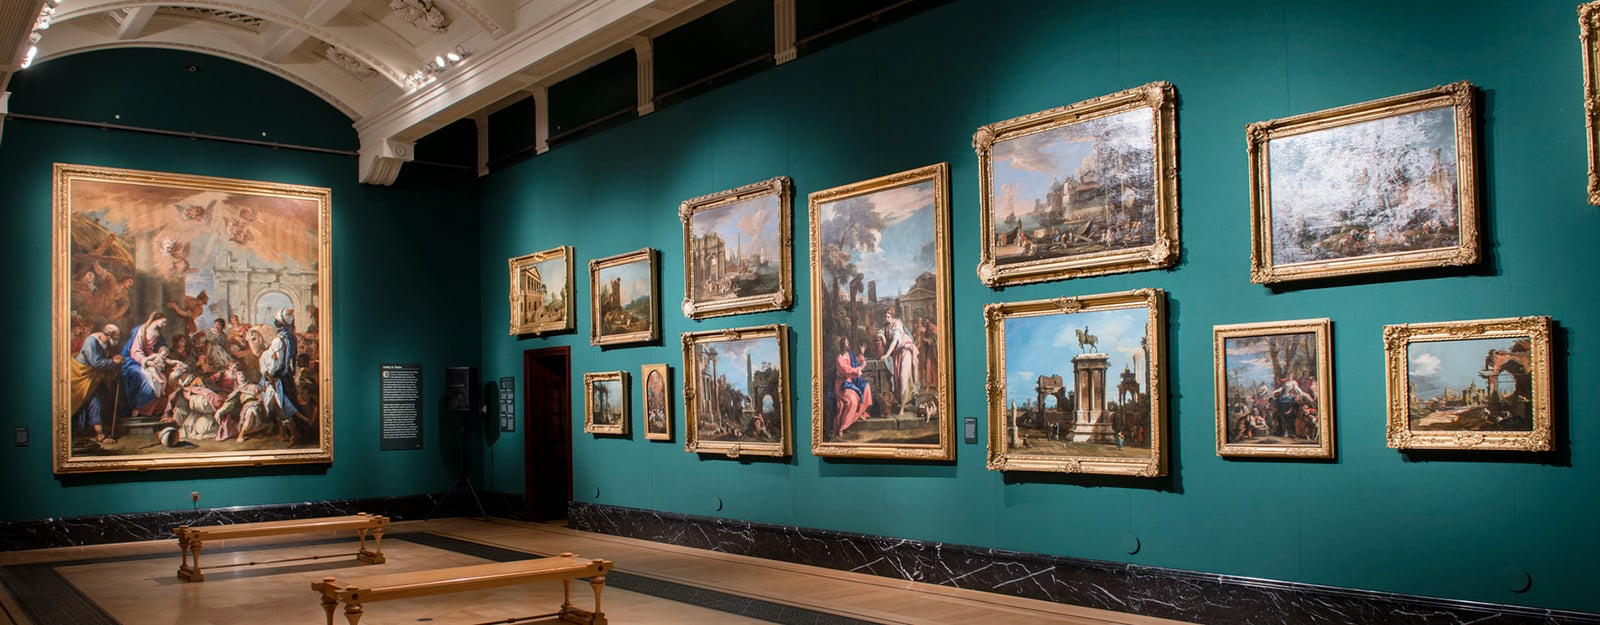 Exhibition in The King's Gallery, Buckingham Palace